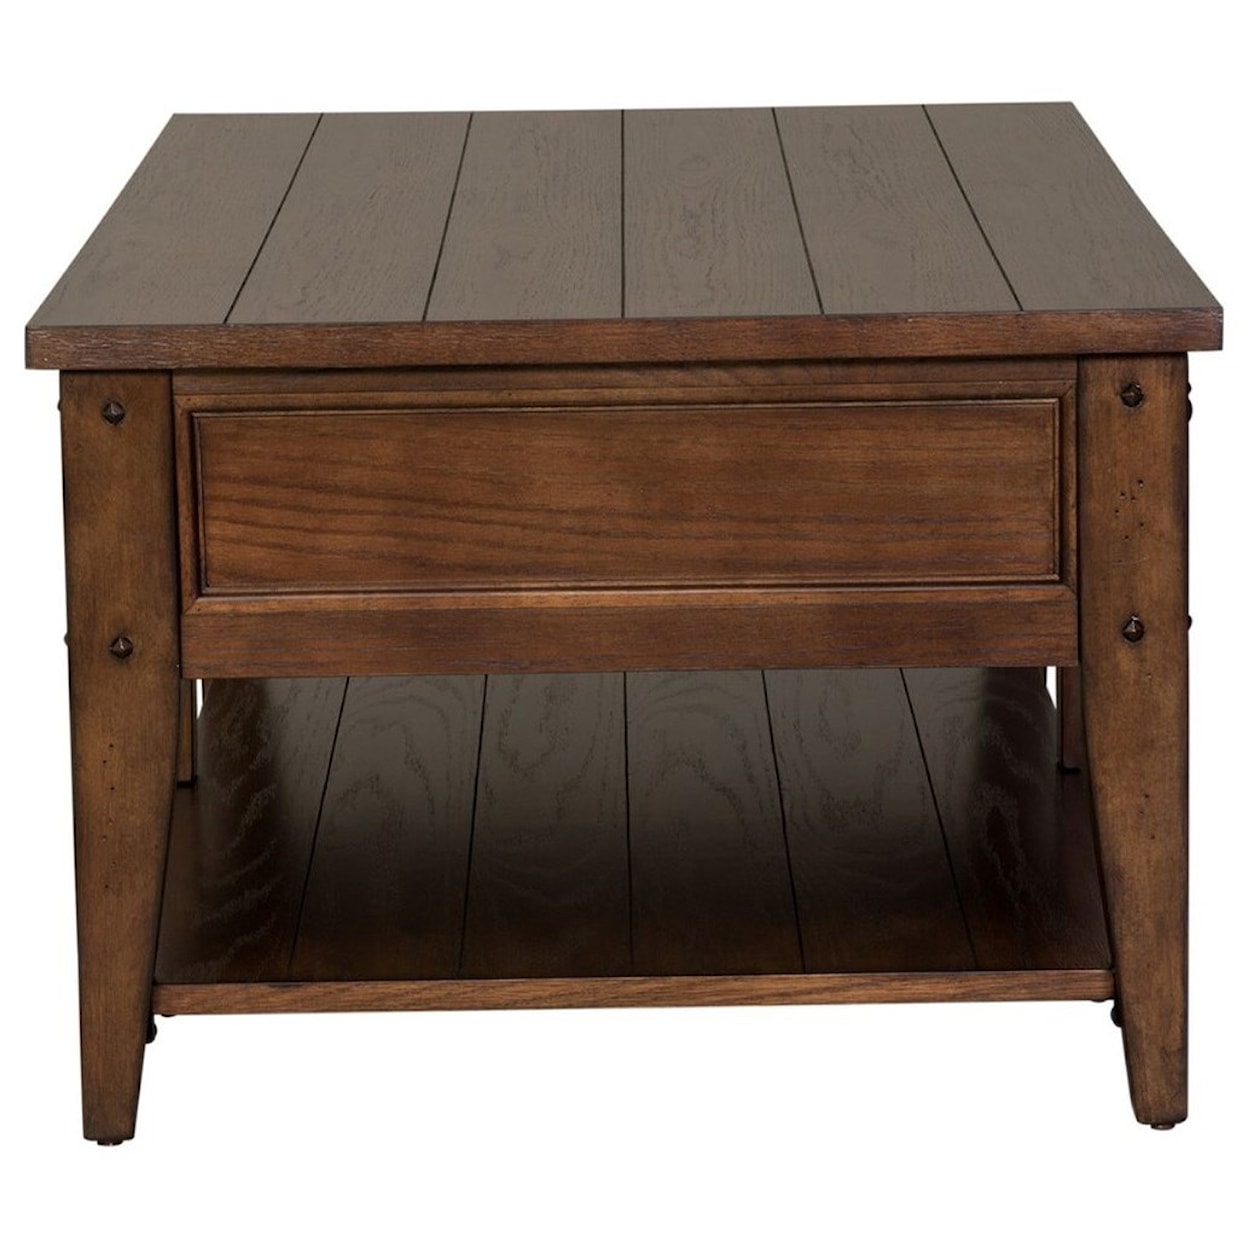 Libby Laney  Cocktail Table